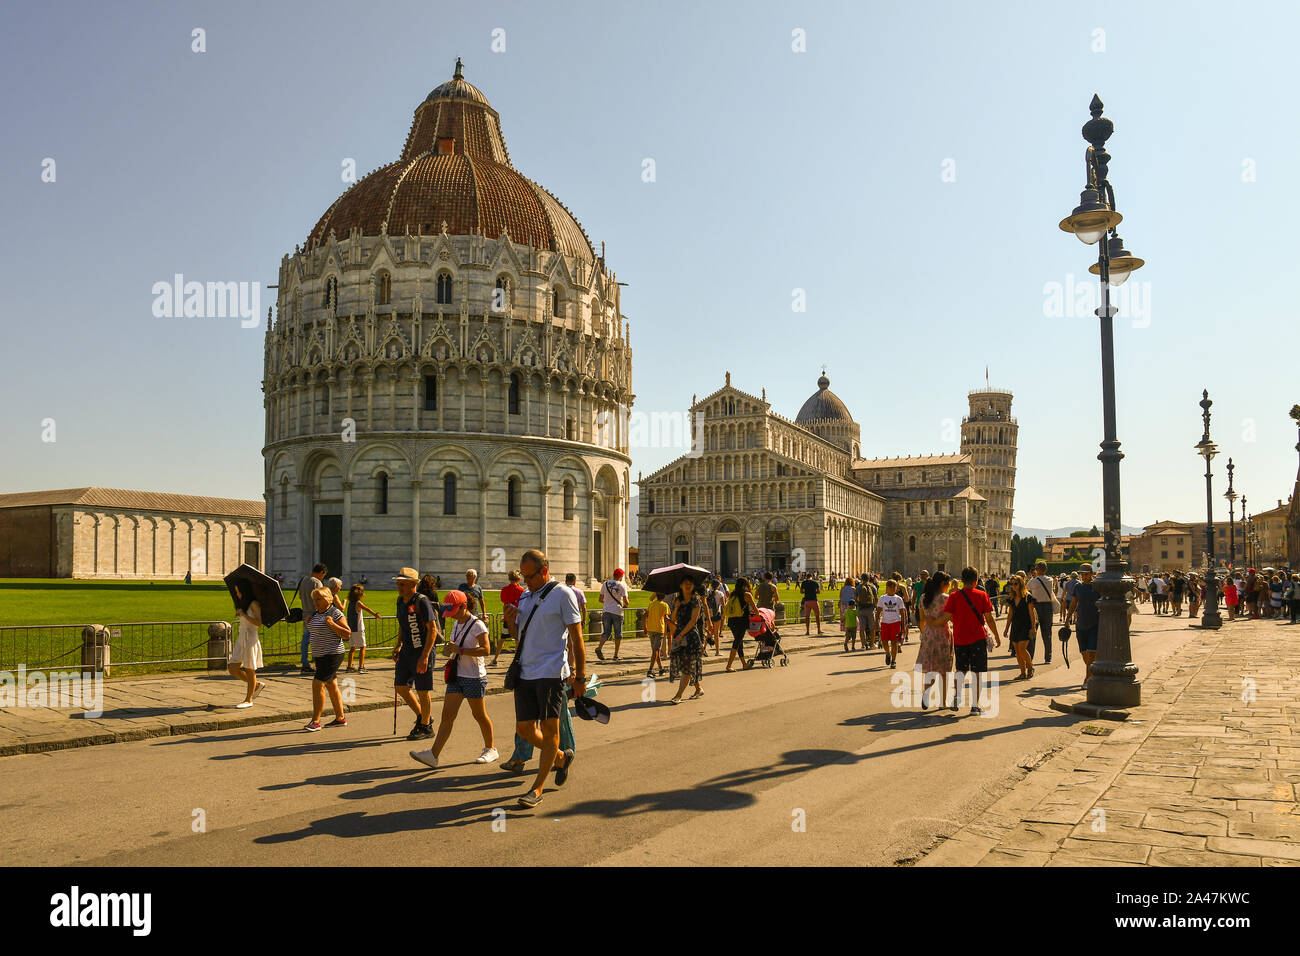 Scenic view of the famous Piazza dei Miracoli square in Pisa with the Baptistery of St John, the Cathedral and the Leaning Tower, Tuscany, Italy Stock Photo